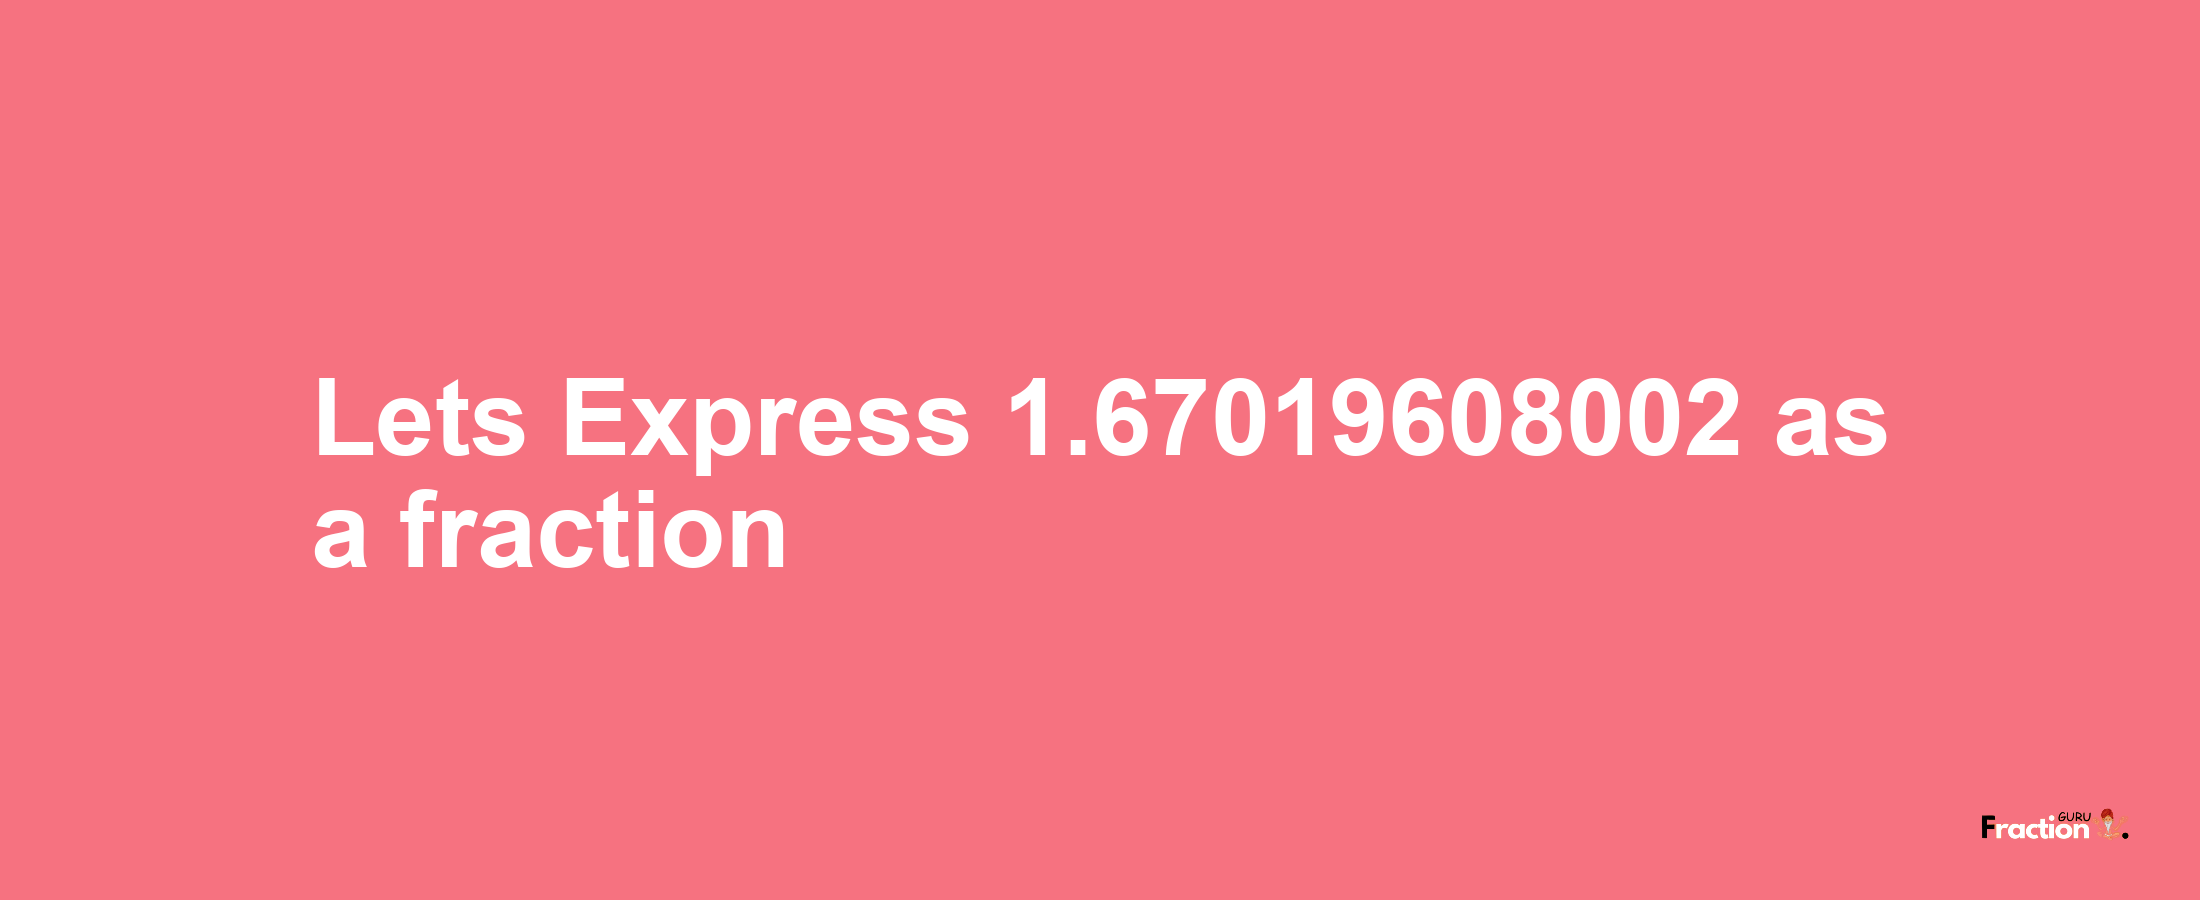 Lets Express 1.67019608002 as afraction